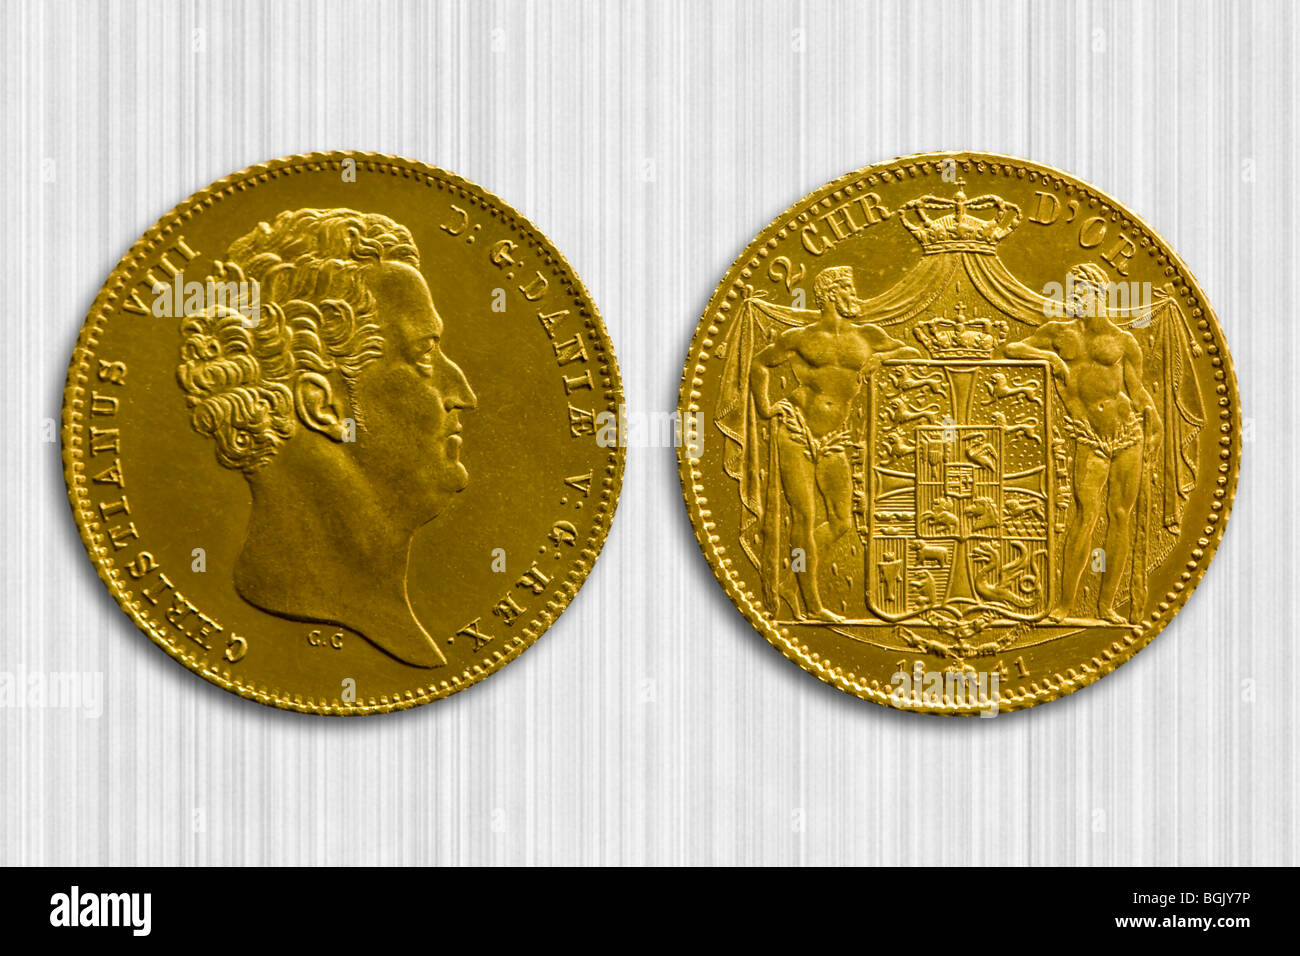 Old gold coins from 1841 Stock Photo